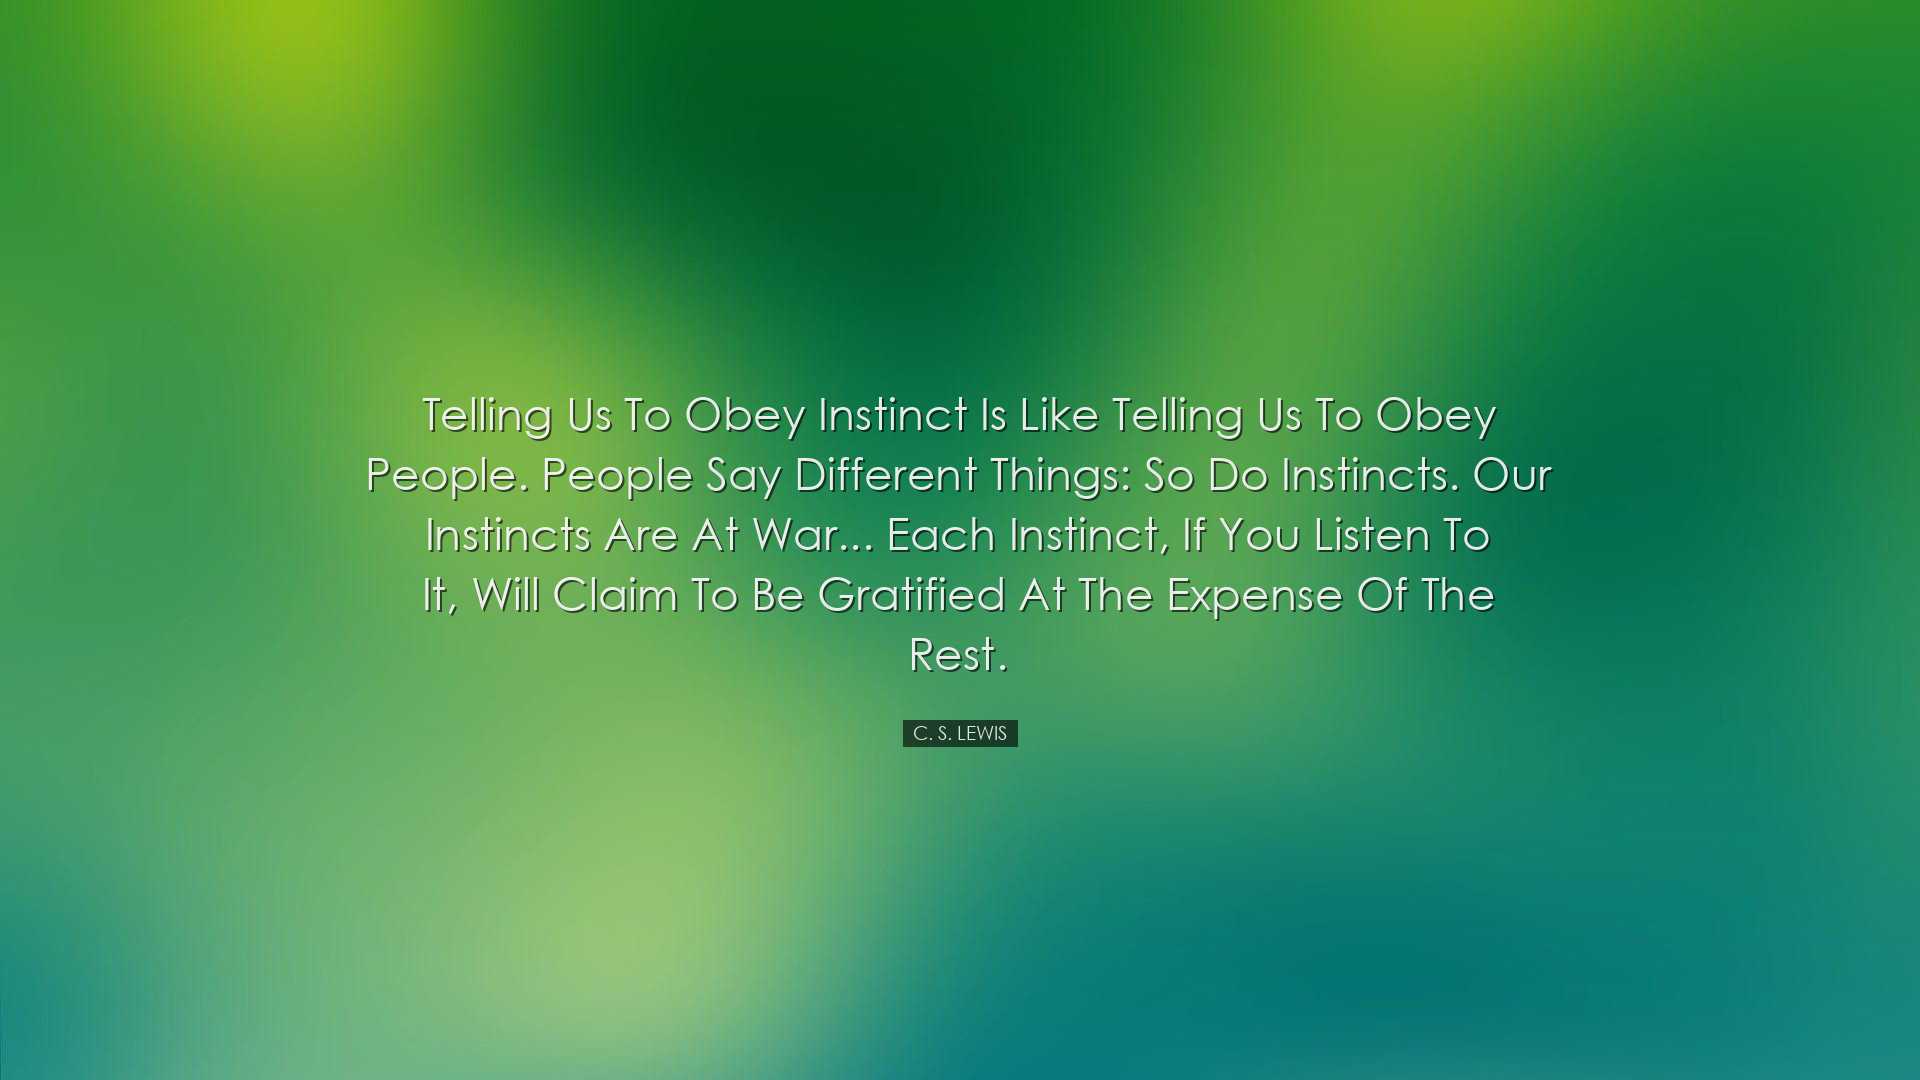 Telling us to obey instinct is like telling us to obey people. Peo